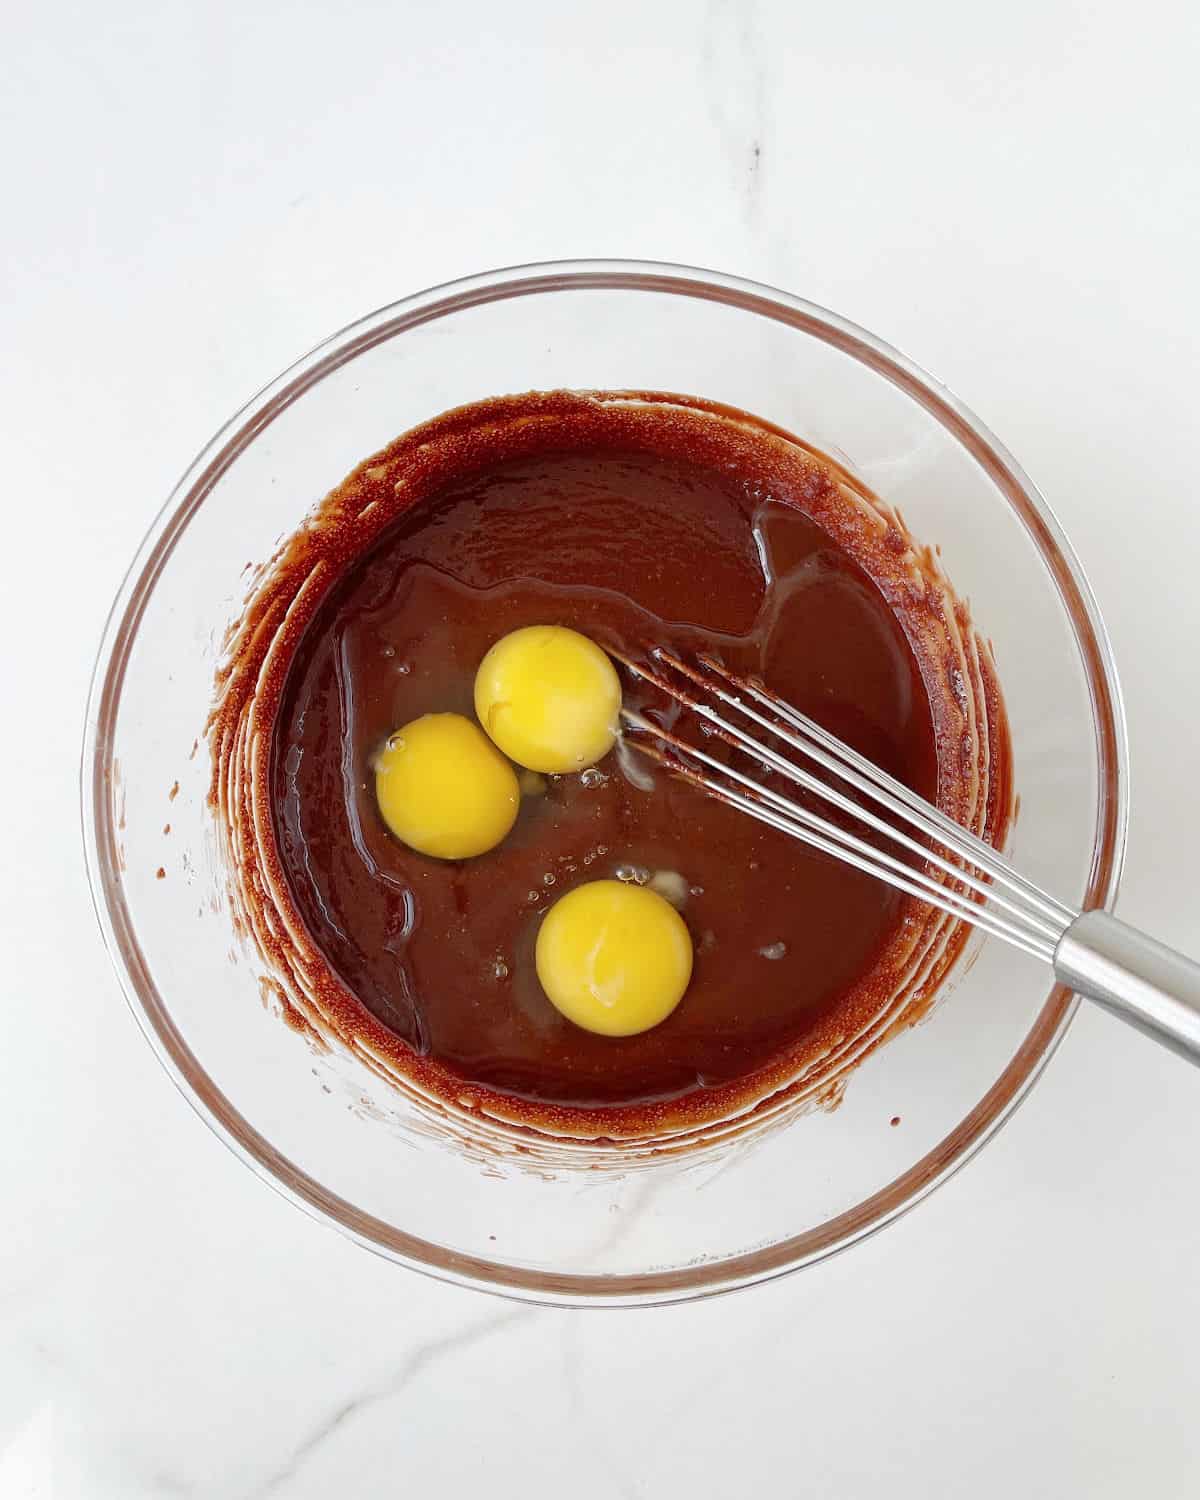 Three eggs added to brownie batter in a glass bowl. A whisk inside. White marble surface.